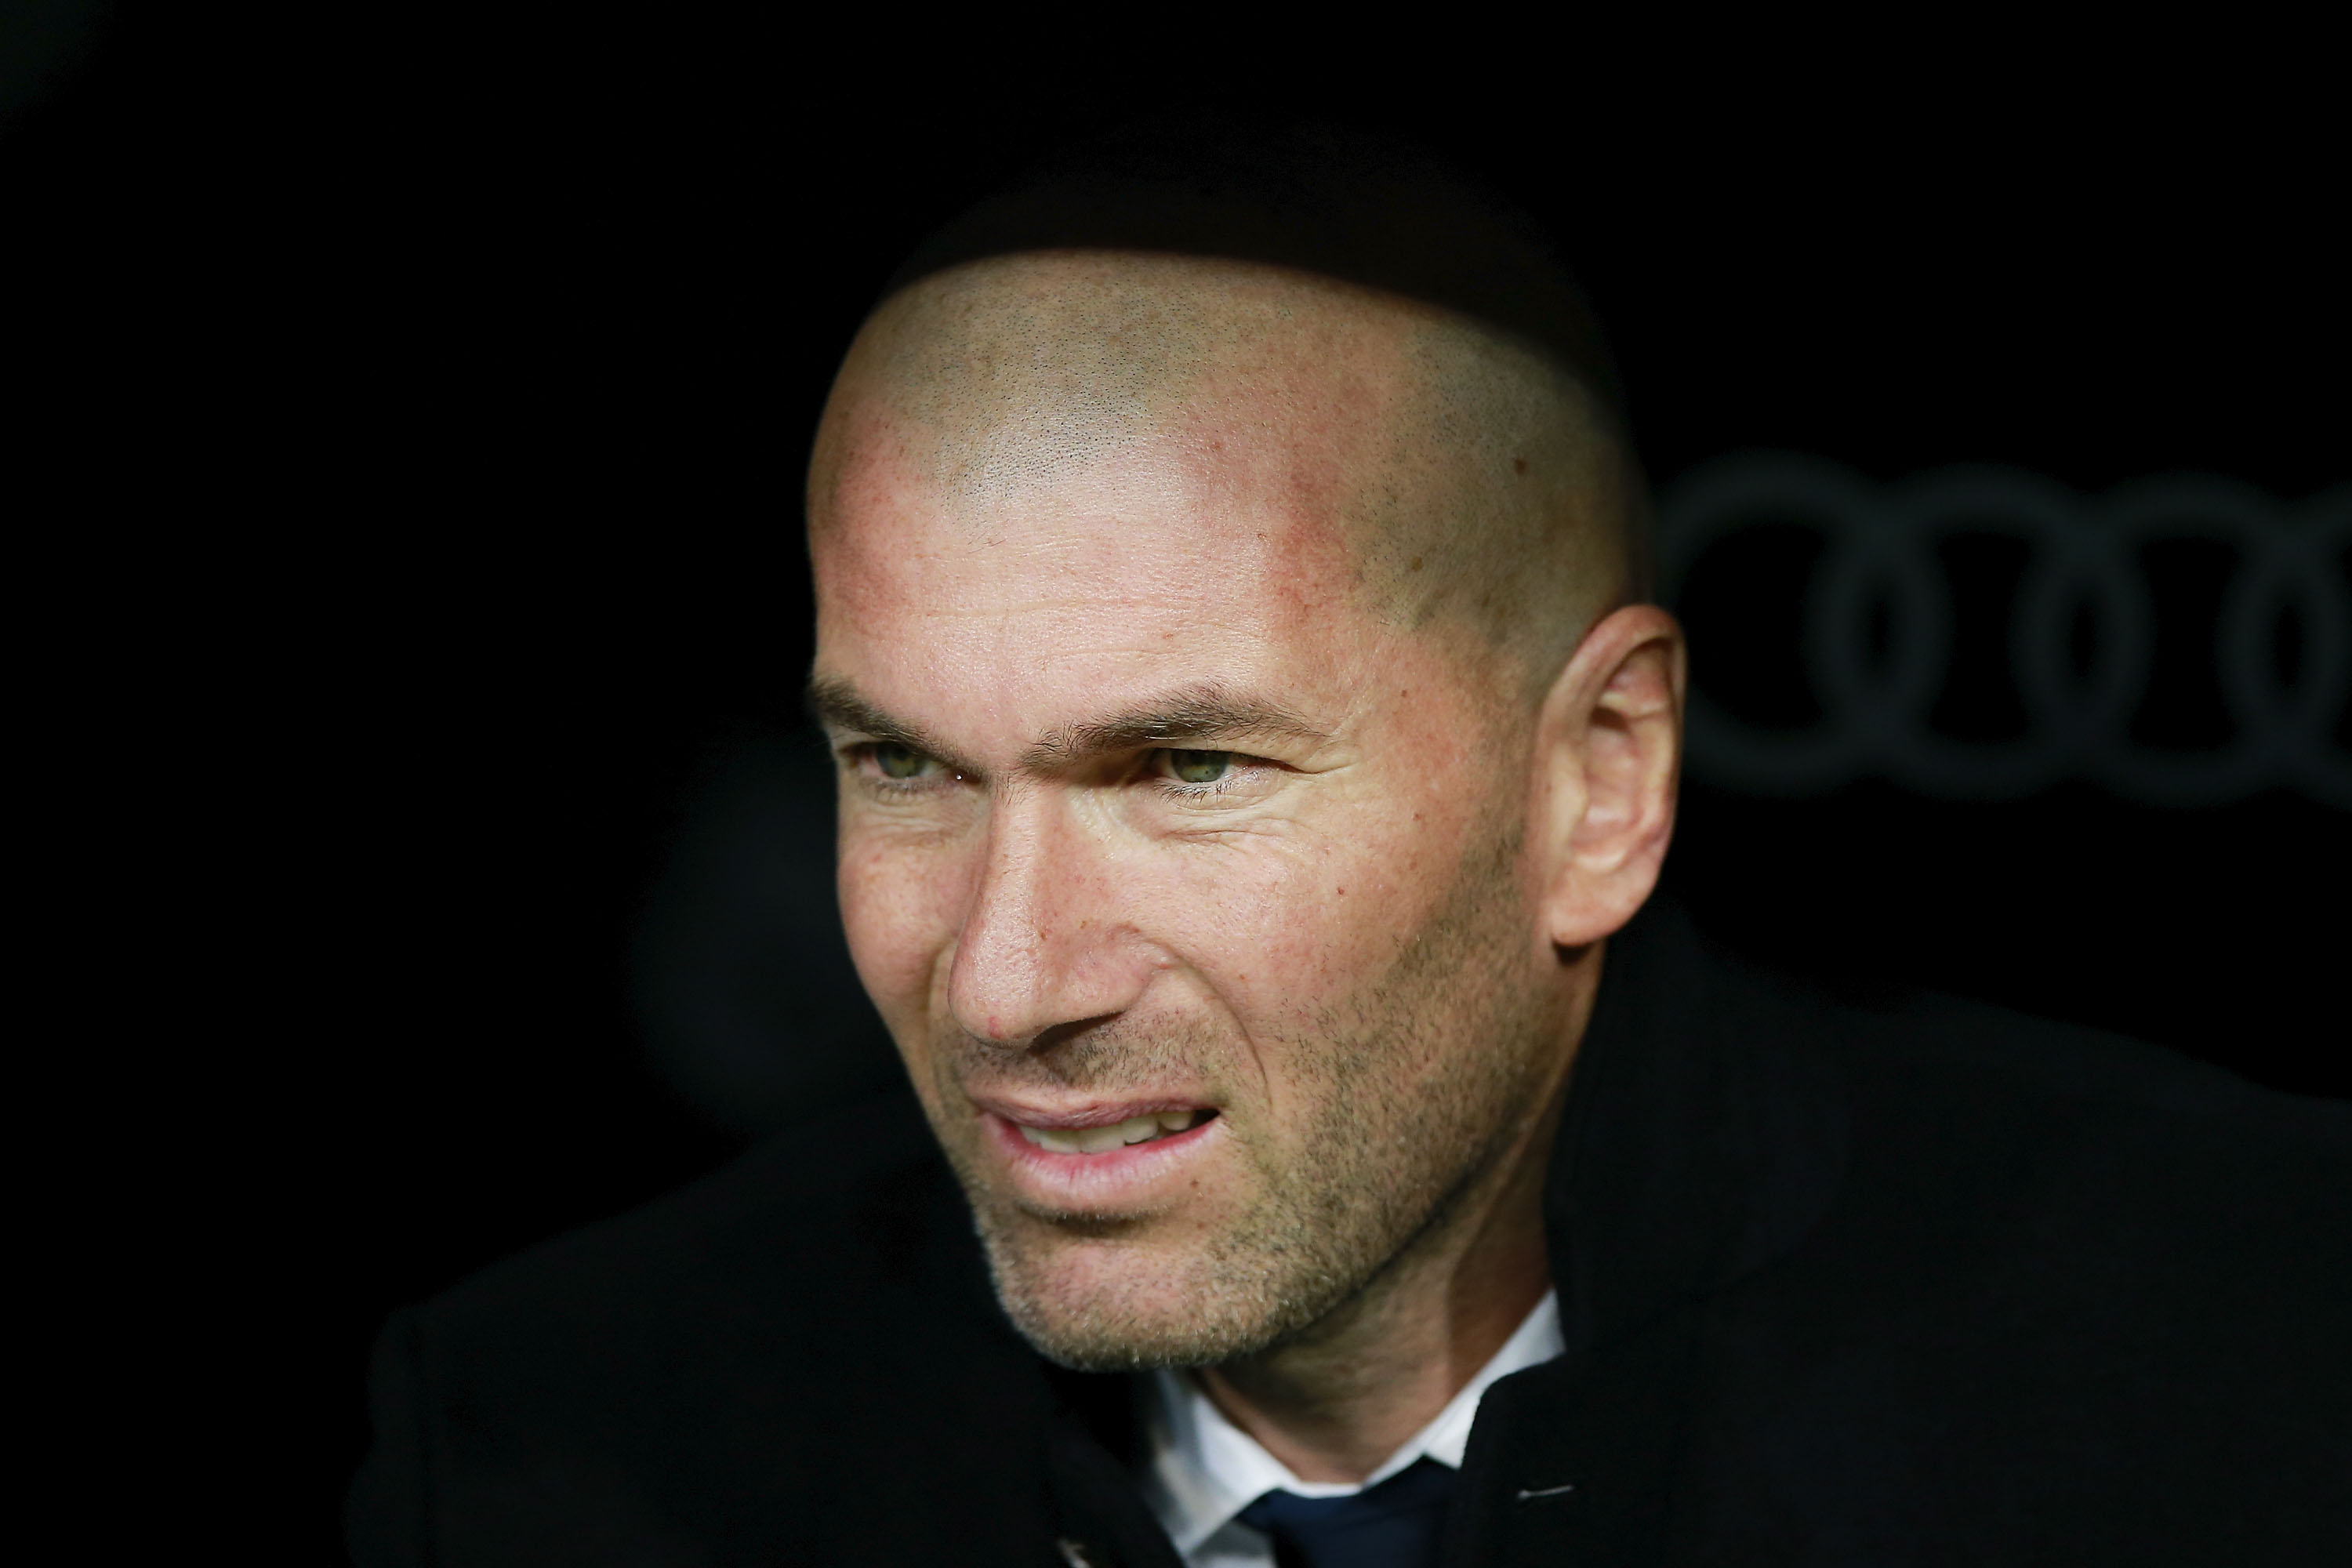 MADRID, SPAIN - MARCH 01: Head coach Zinedine Zidane of Real Madrid CF gestures from the bench prior to start the La Liga match between Real Madrid CF and UD Las Palmas at Estadio Santiago Bernabeu on March 1, 2017 in Madrid, Spain.  (Photo by Gonzalo Arroyo Moreno/Getty Images)